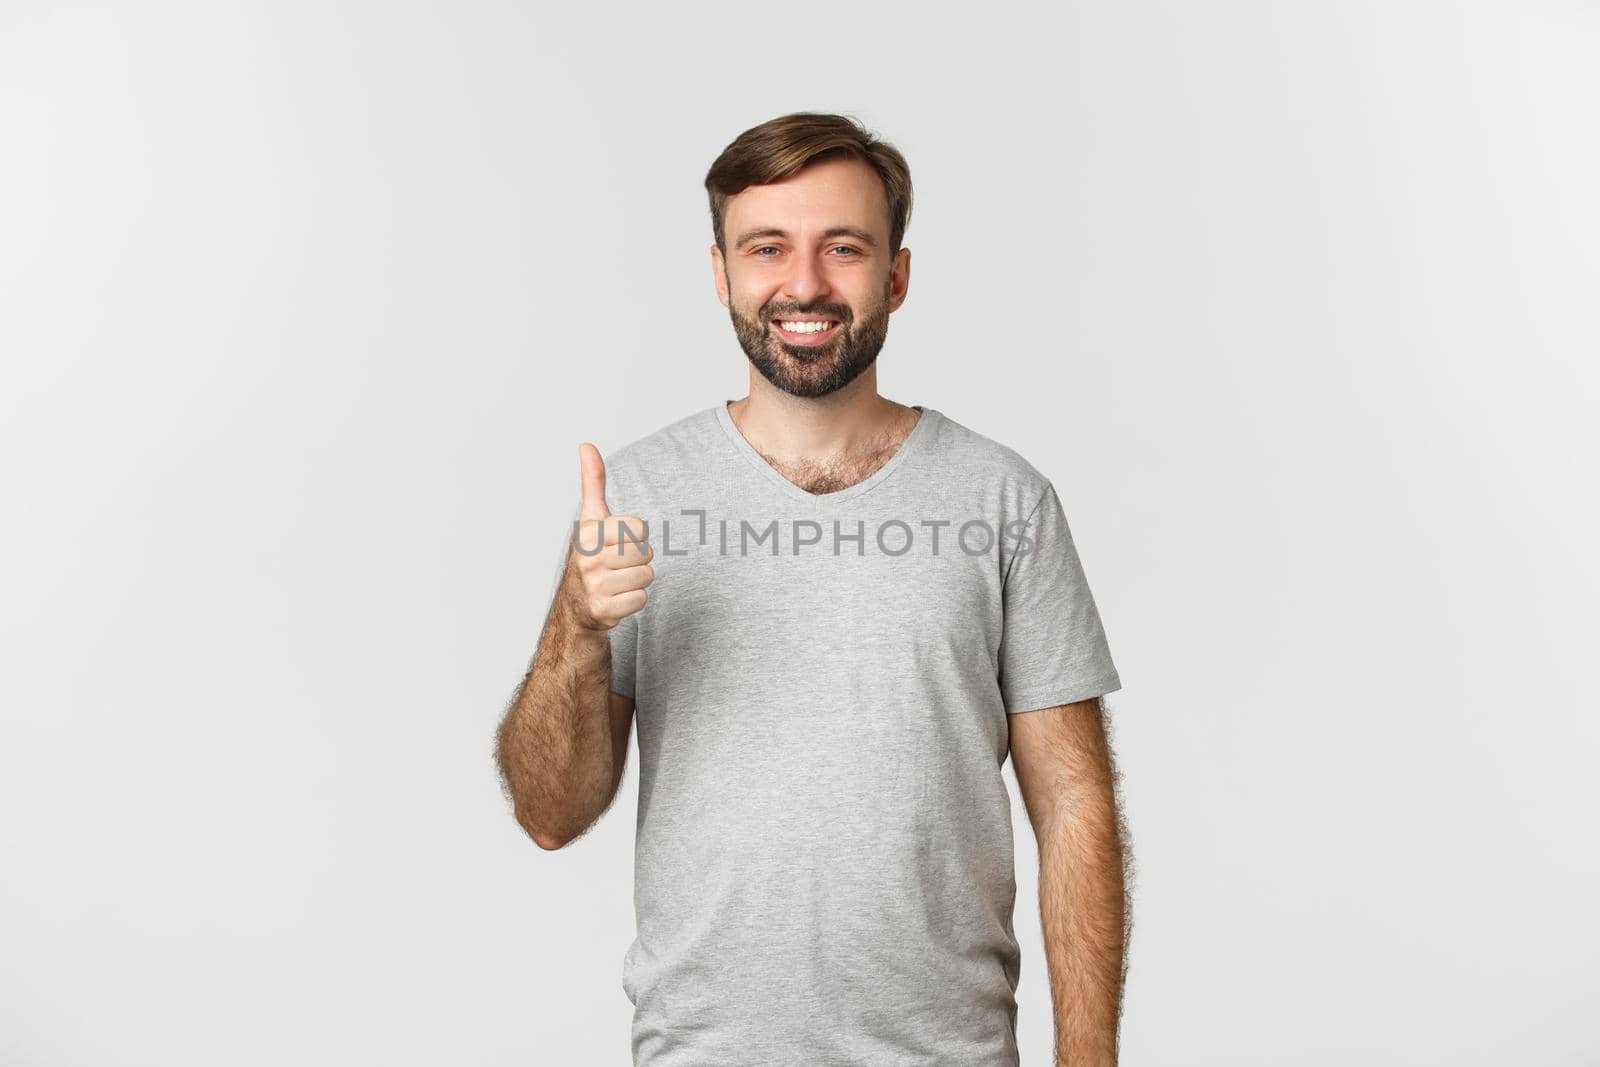 Image of satisfied smiling man in gray t-shirt, showing thumbs-up in approval, recommend something good, white background.